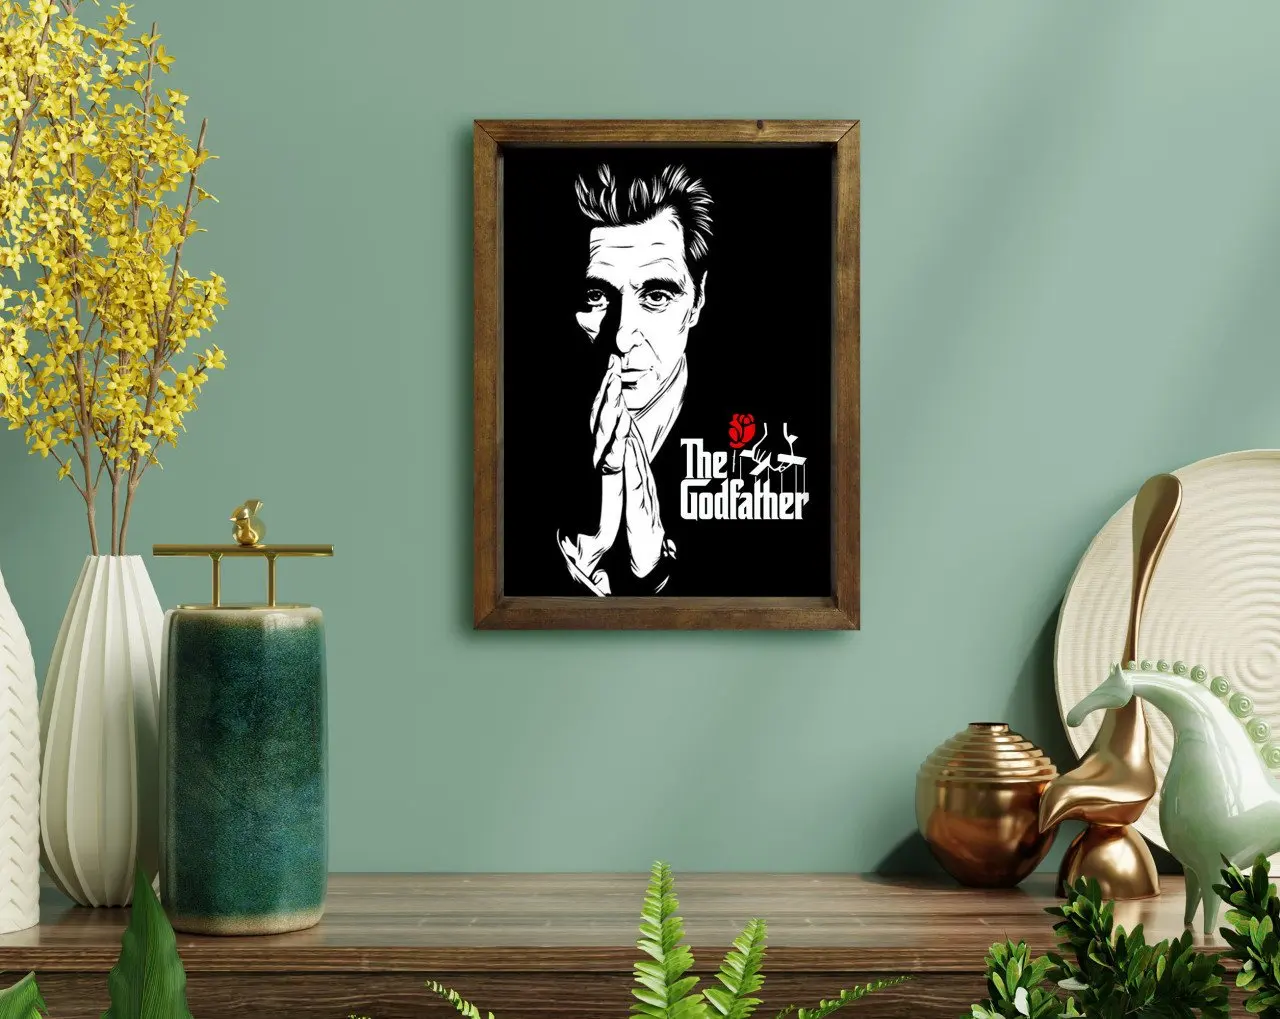 

BK Home Godfather Godfather Design Natural Solid Wood Framed Tablo-1 Special Design Friends Lovers Gift Beautiful Memories Office Decor